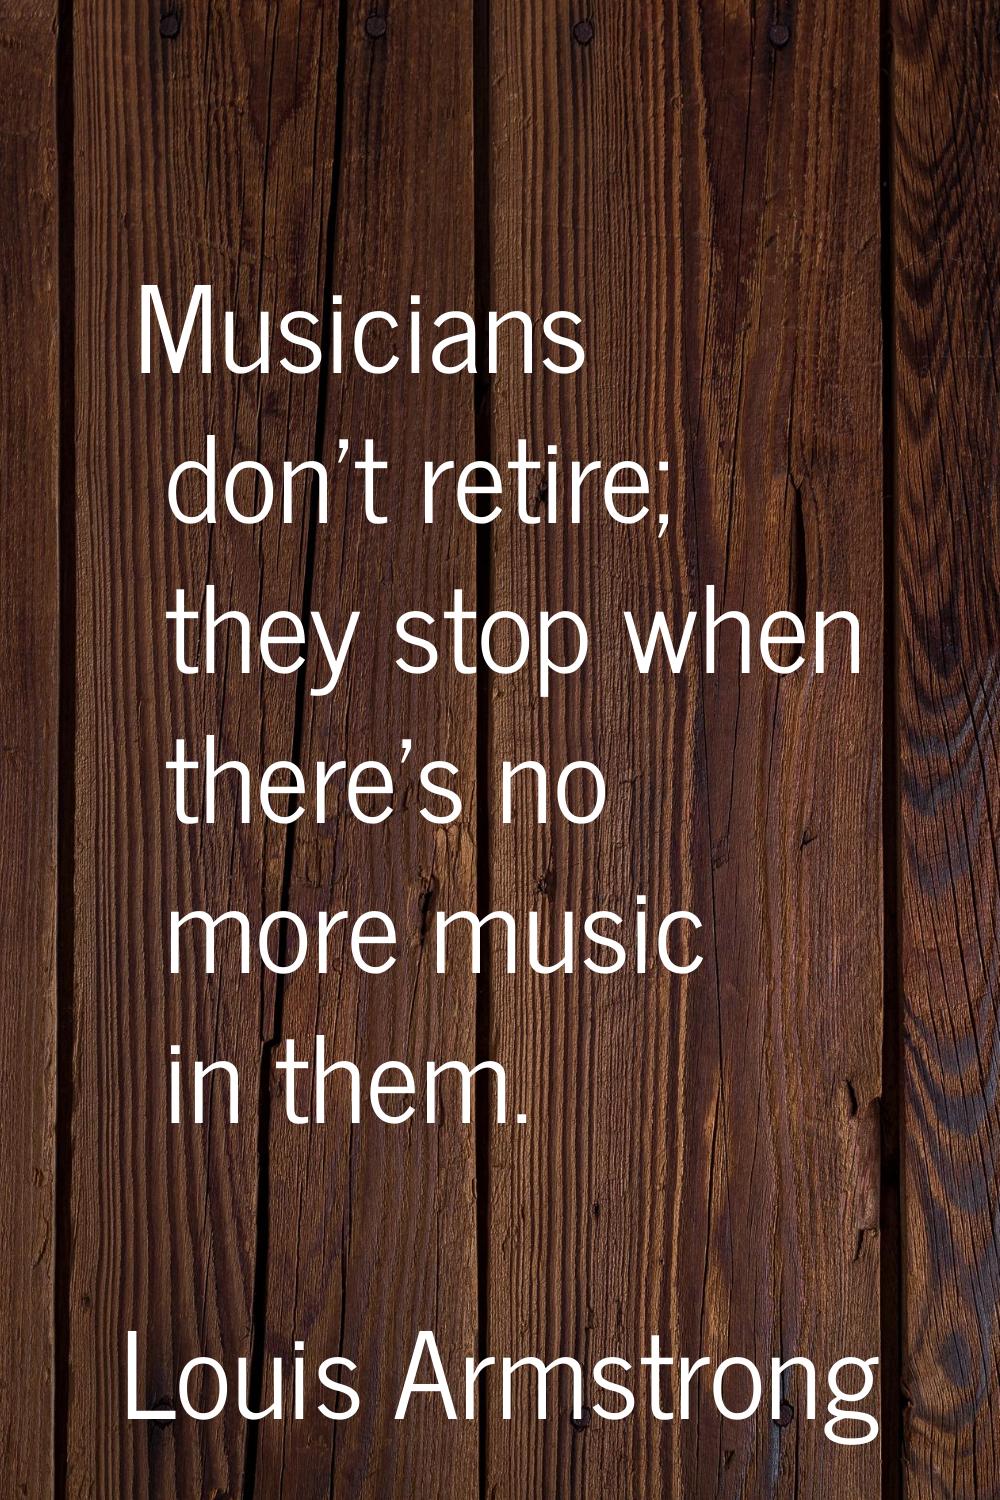 Musicians don't retire; they stop when there's no more music in them.